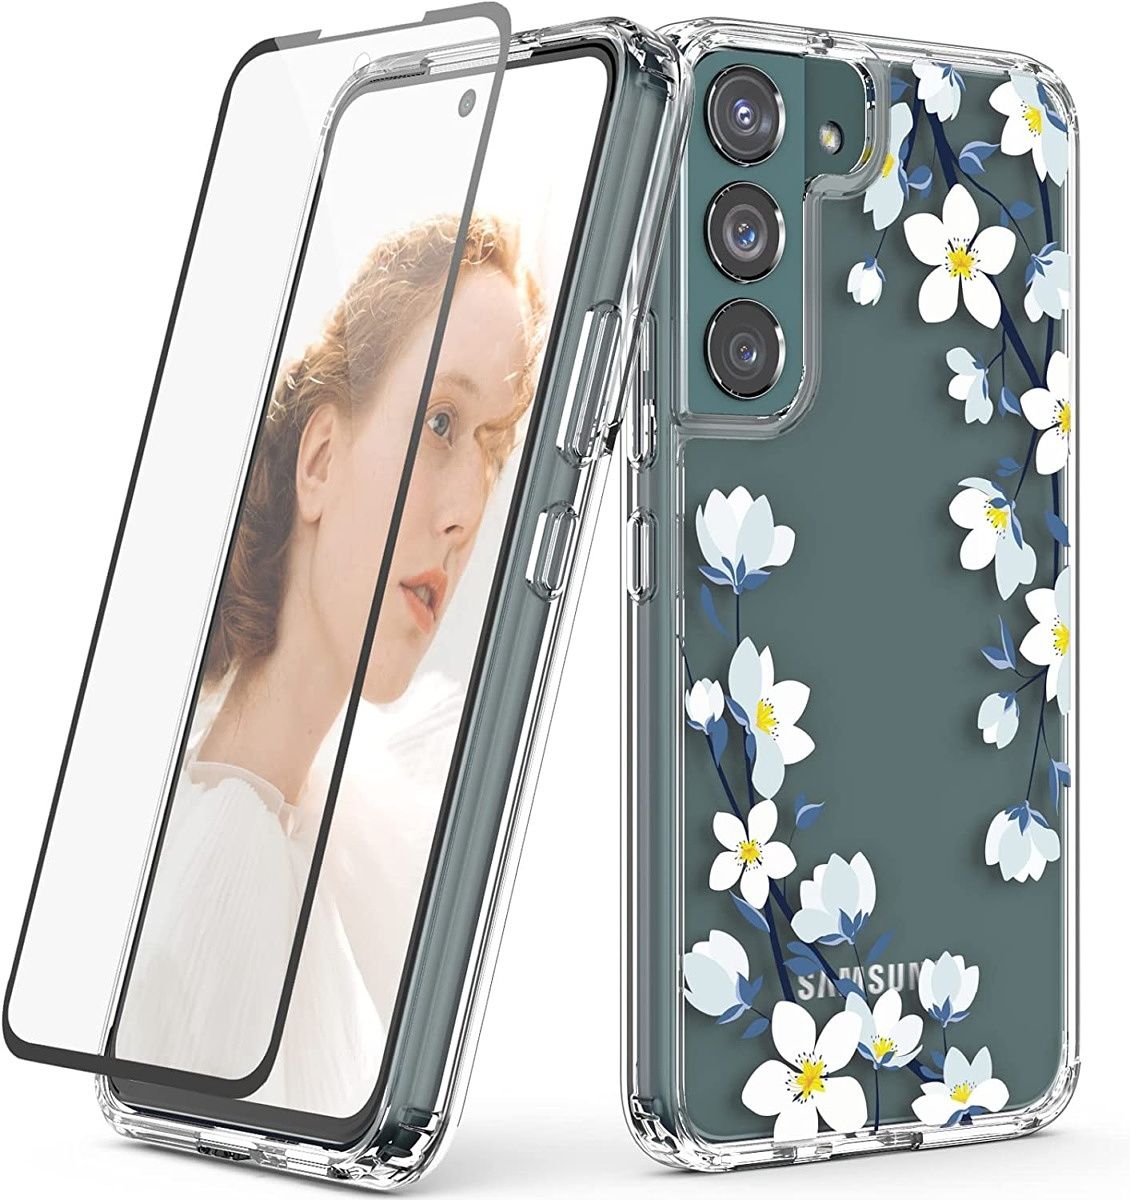 This stylish, shockproof case lacks sophistication. It's for those of you who want to add personality to their phones without overdoing it.